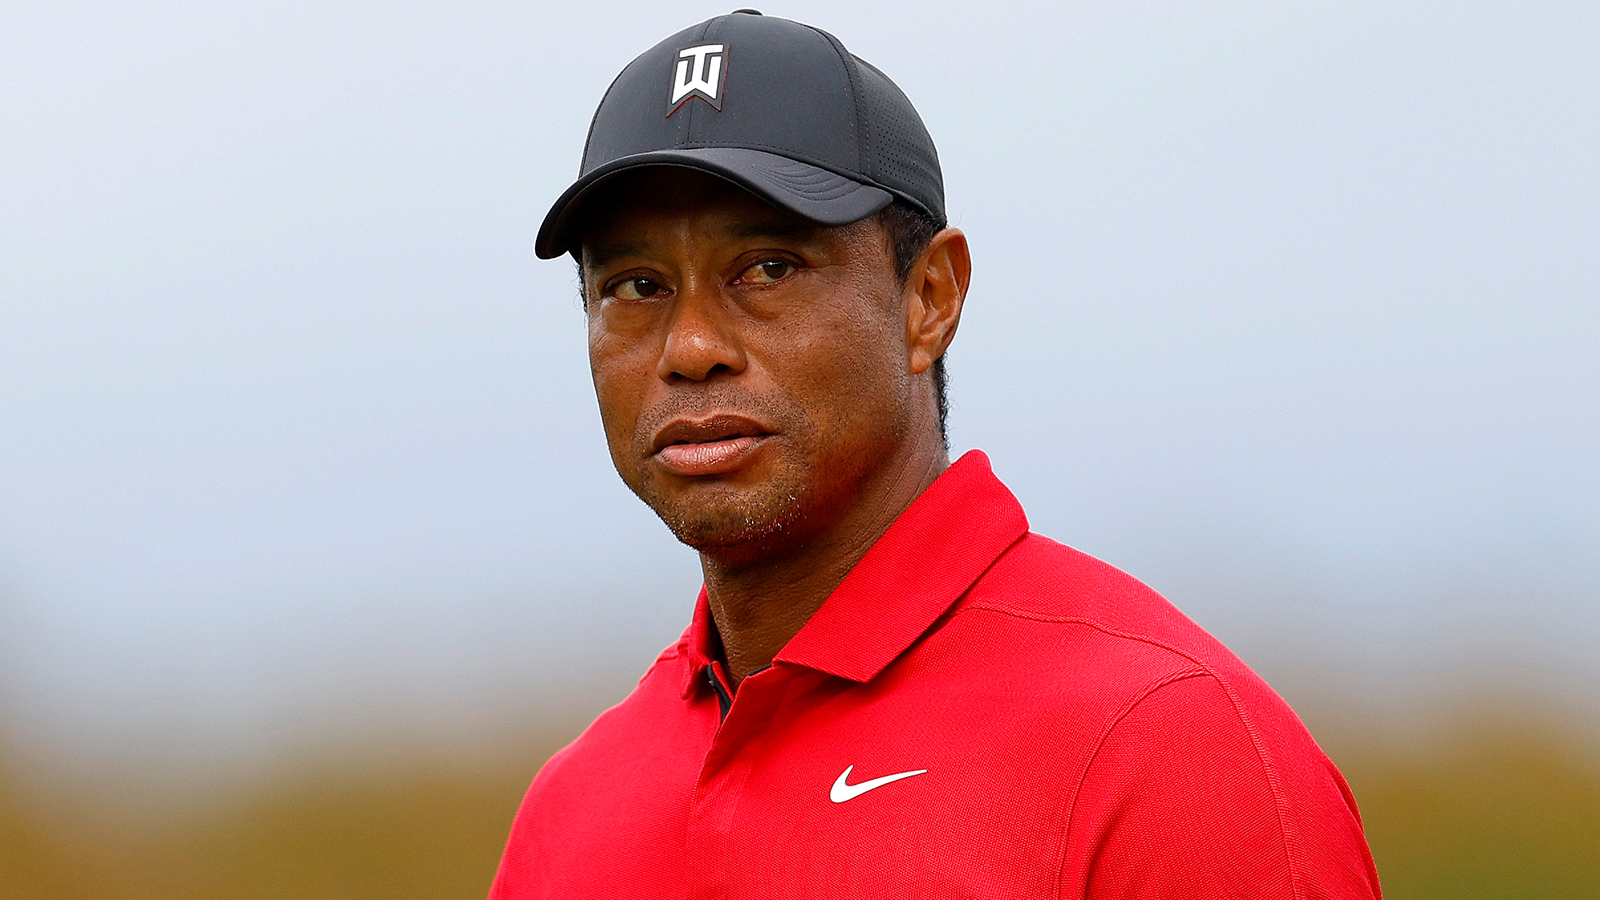 Tiger Woods Has 'Zero Mobility' In Ankle Ahead Of The Masters